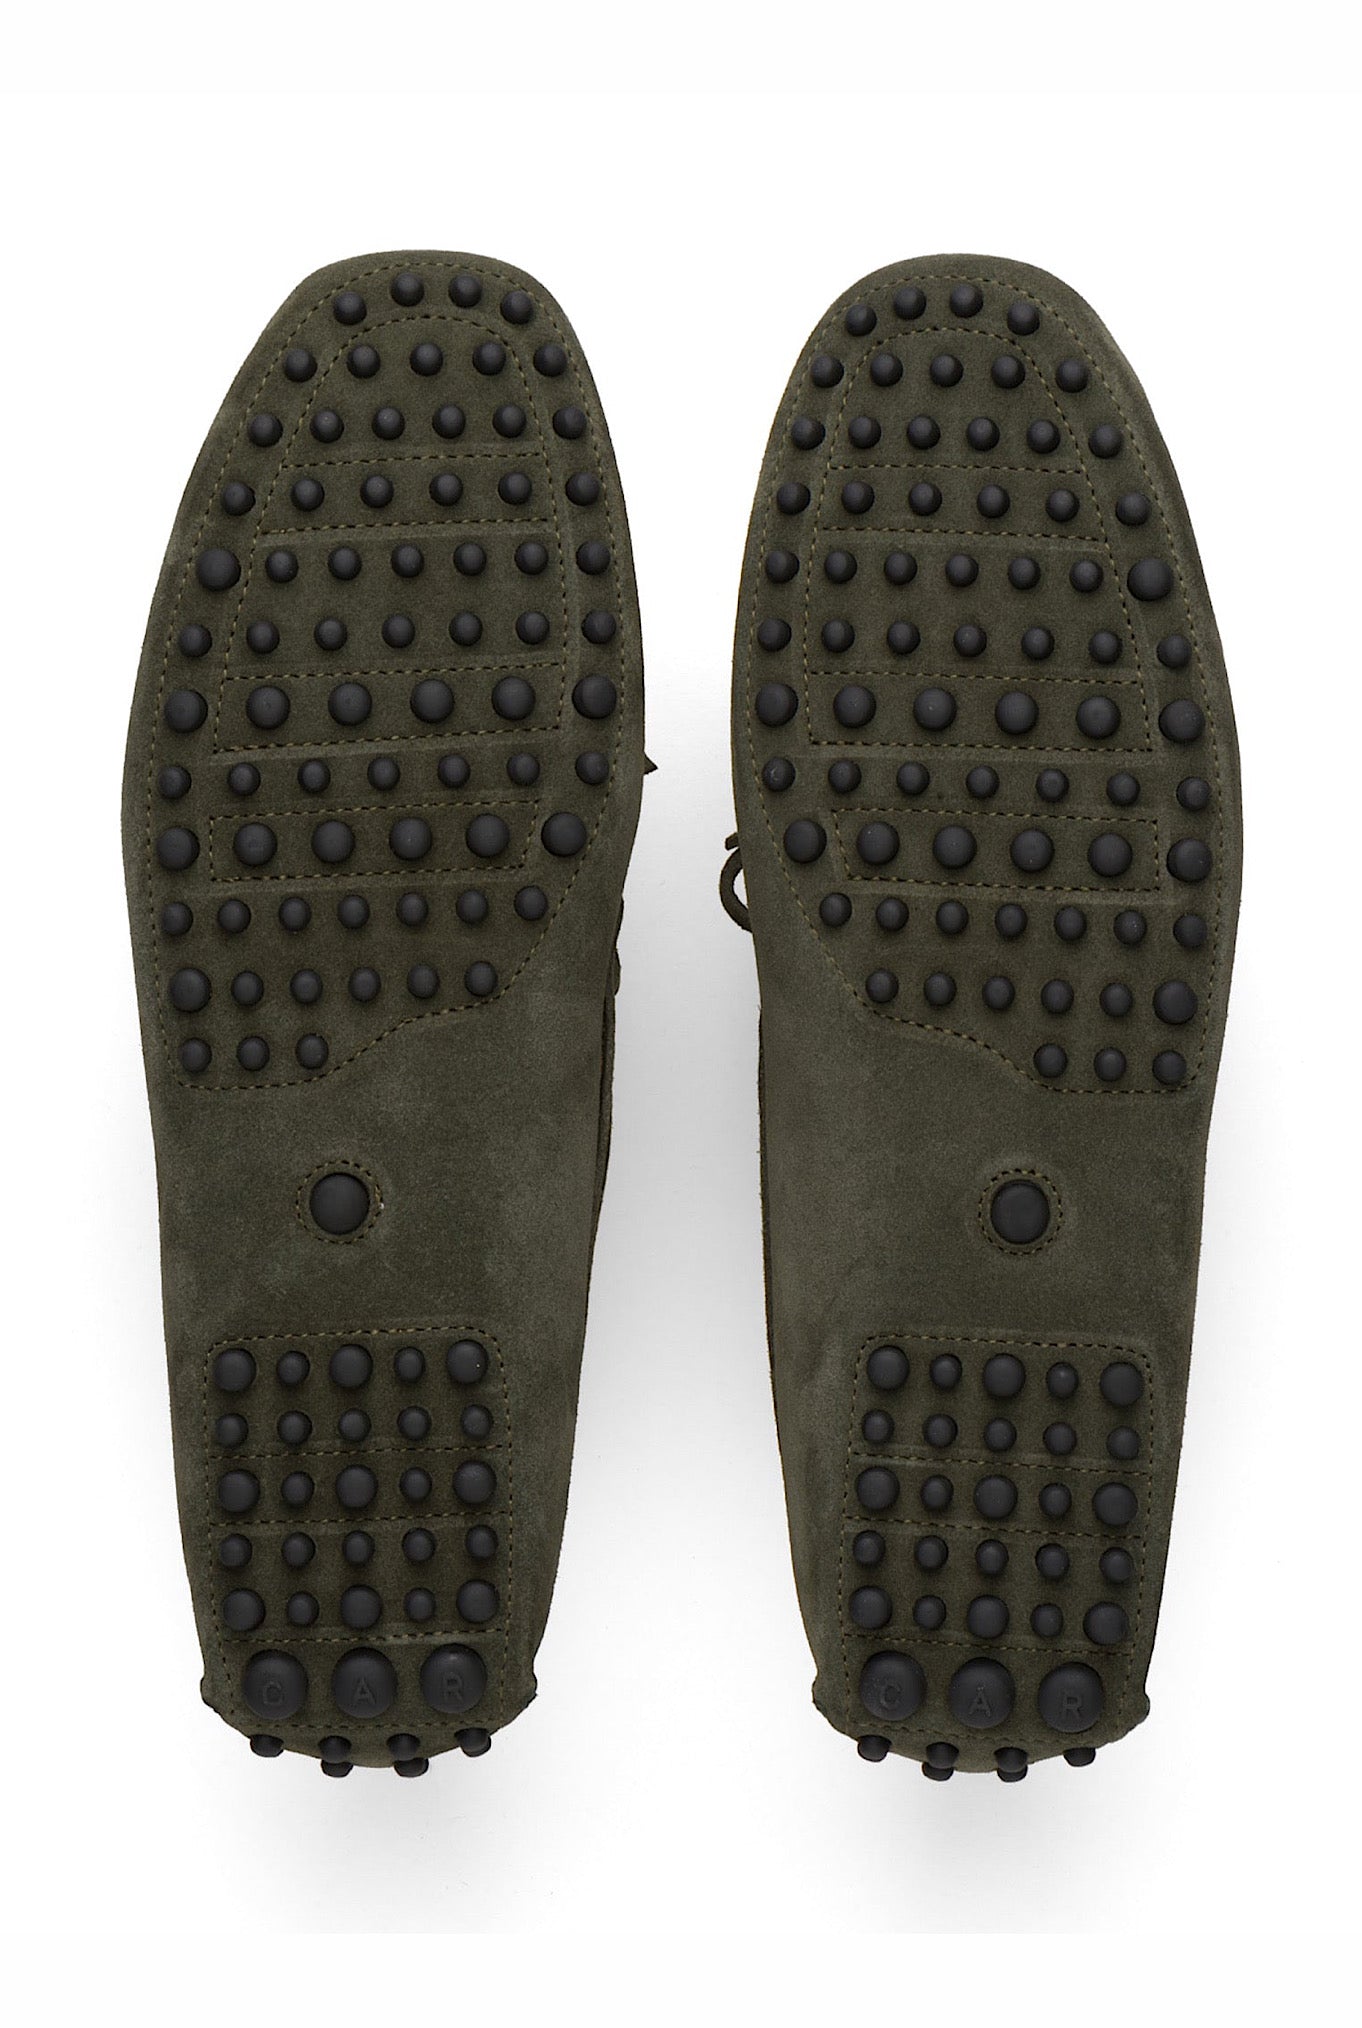 CAR SHOE Camouflage Green Suede Moccasin